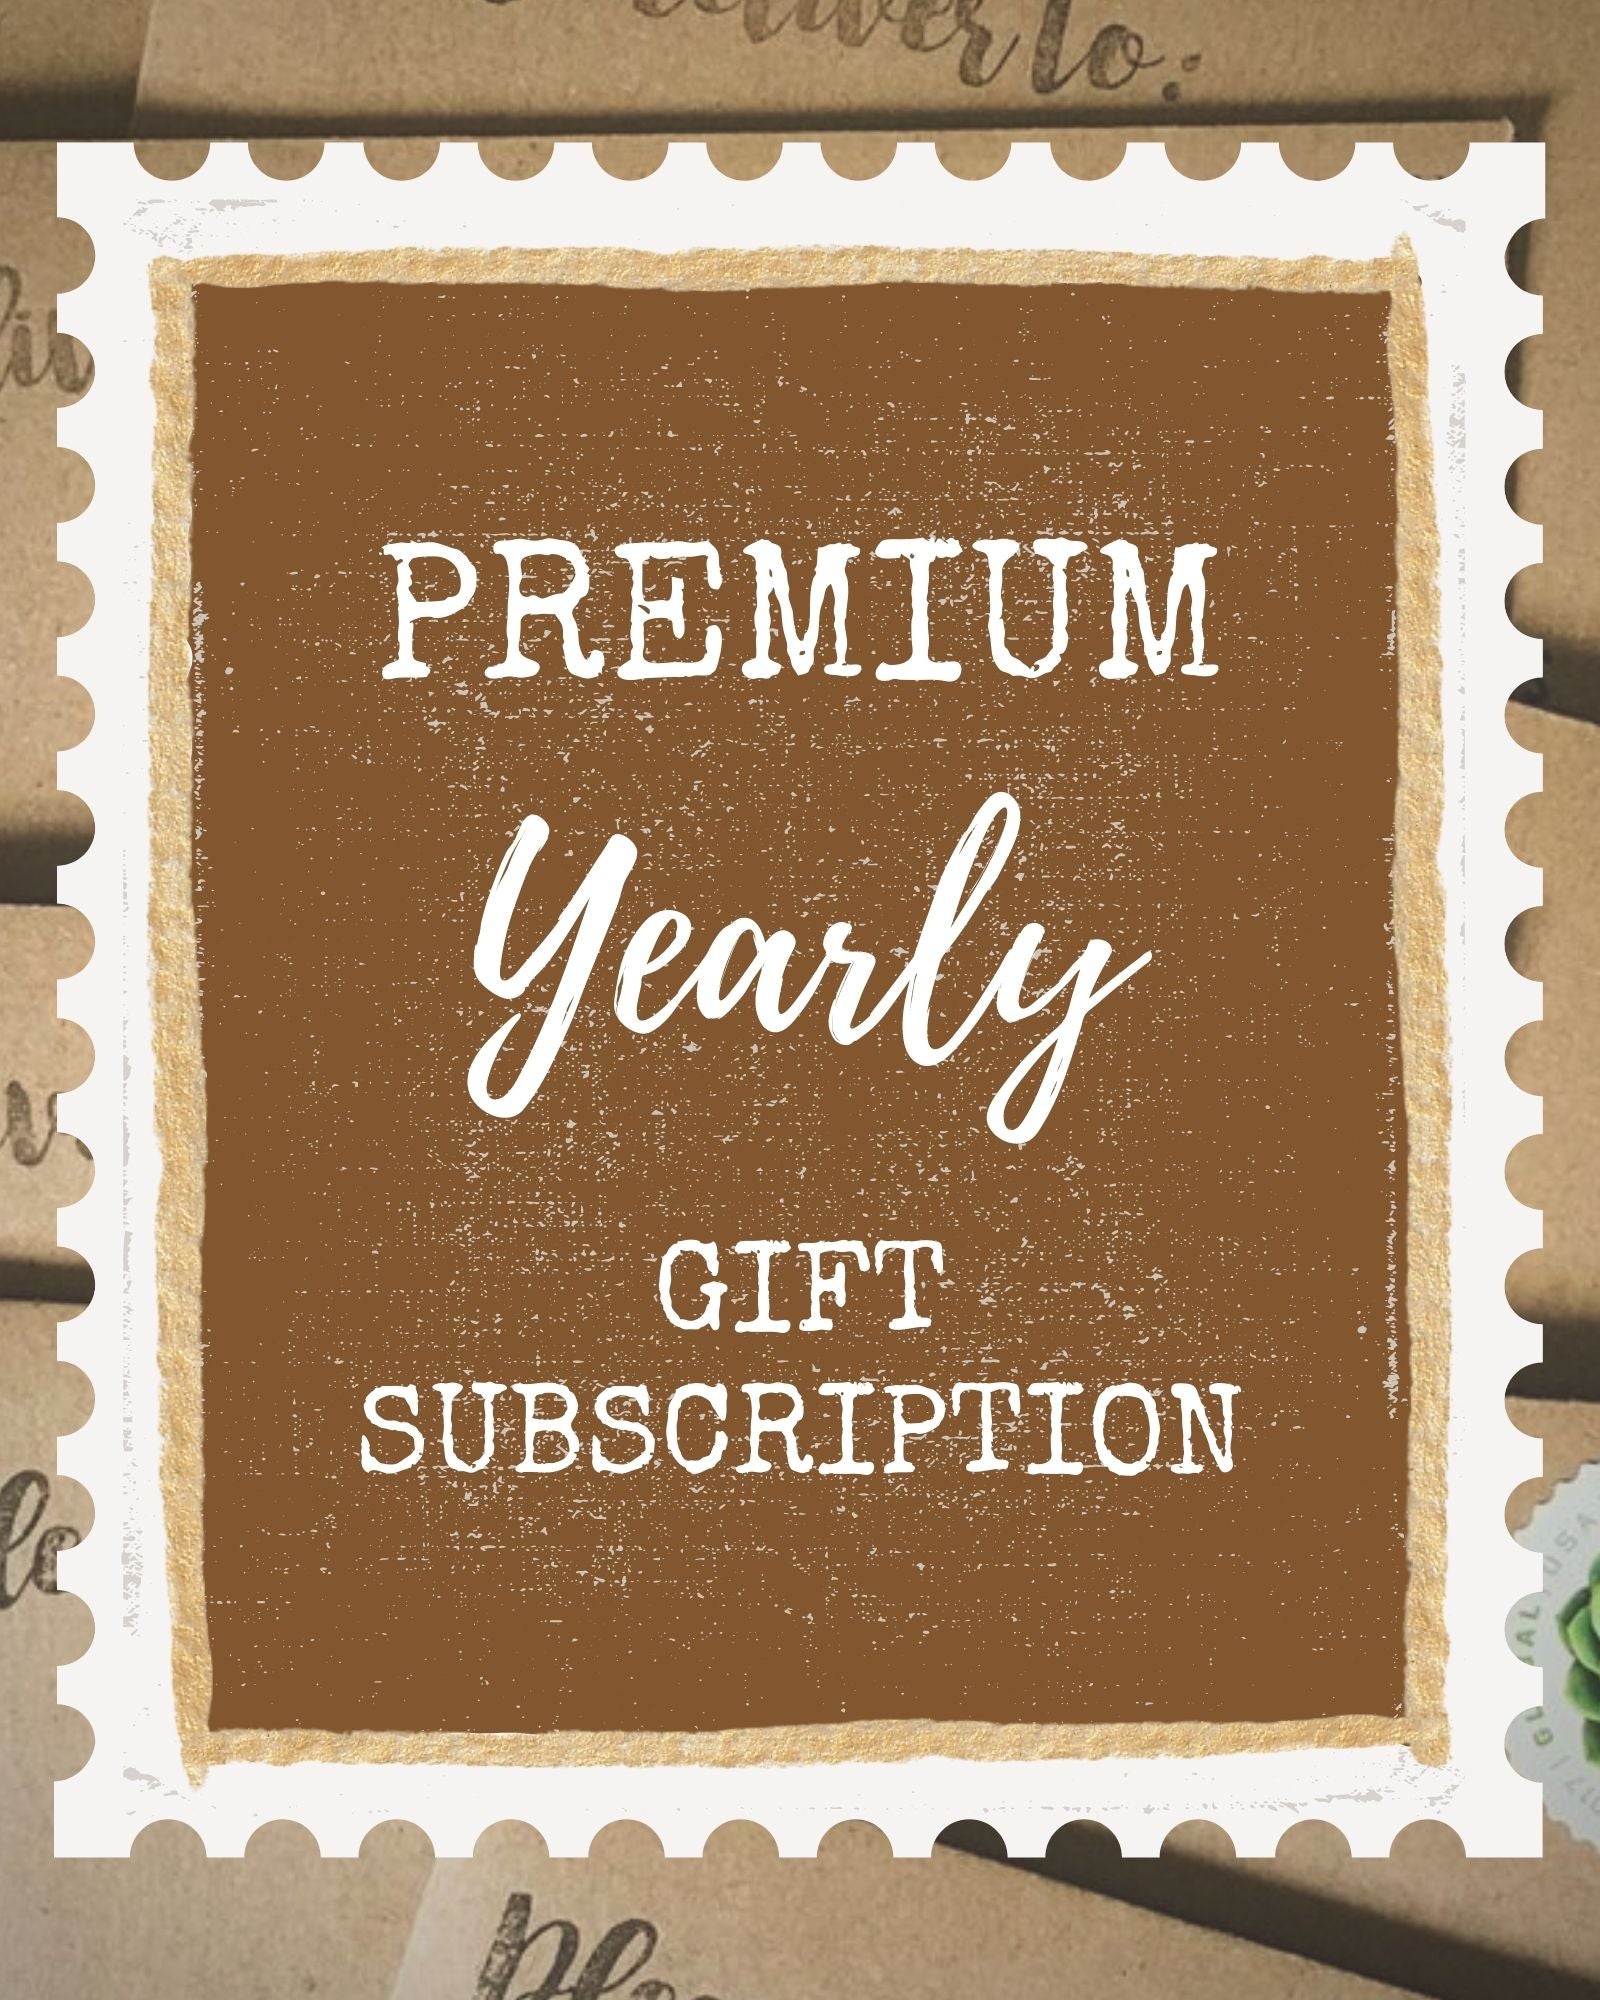 Premium 12 Month Gift Subscription *SAVE $10*